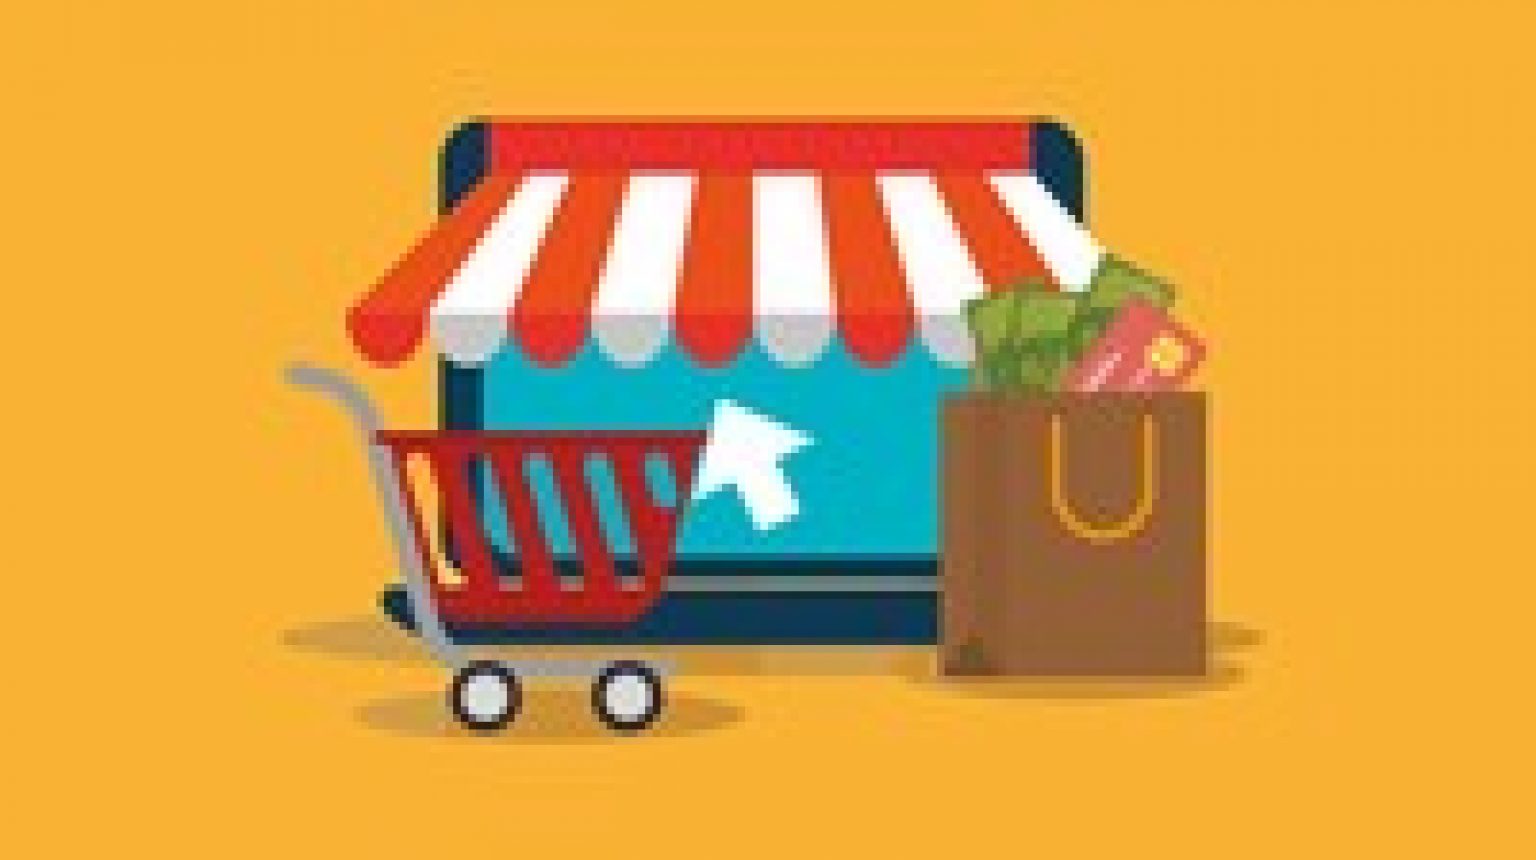 online shopping cart project in java